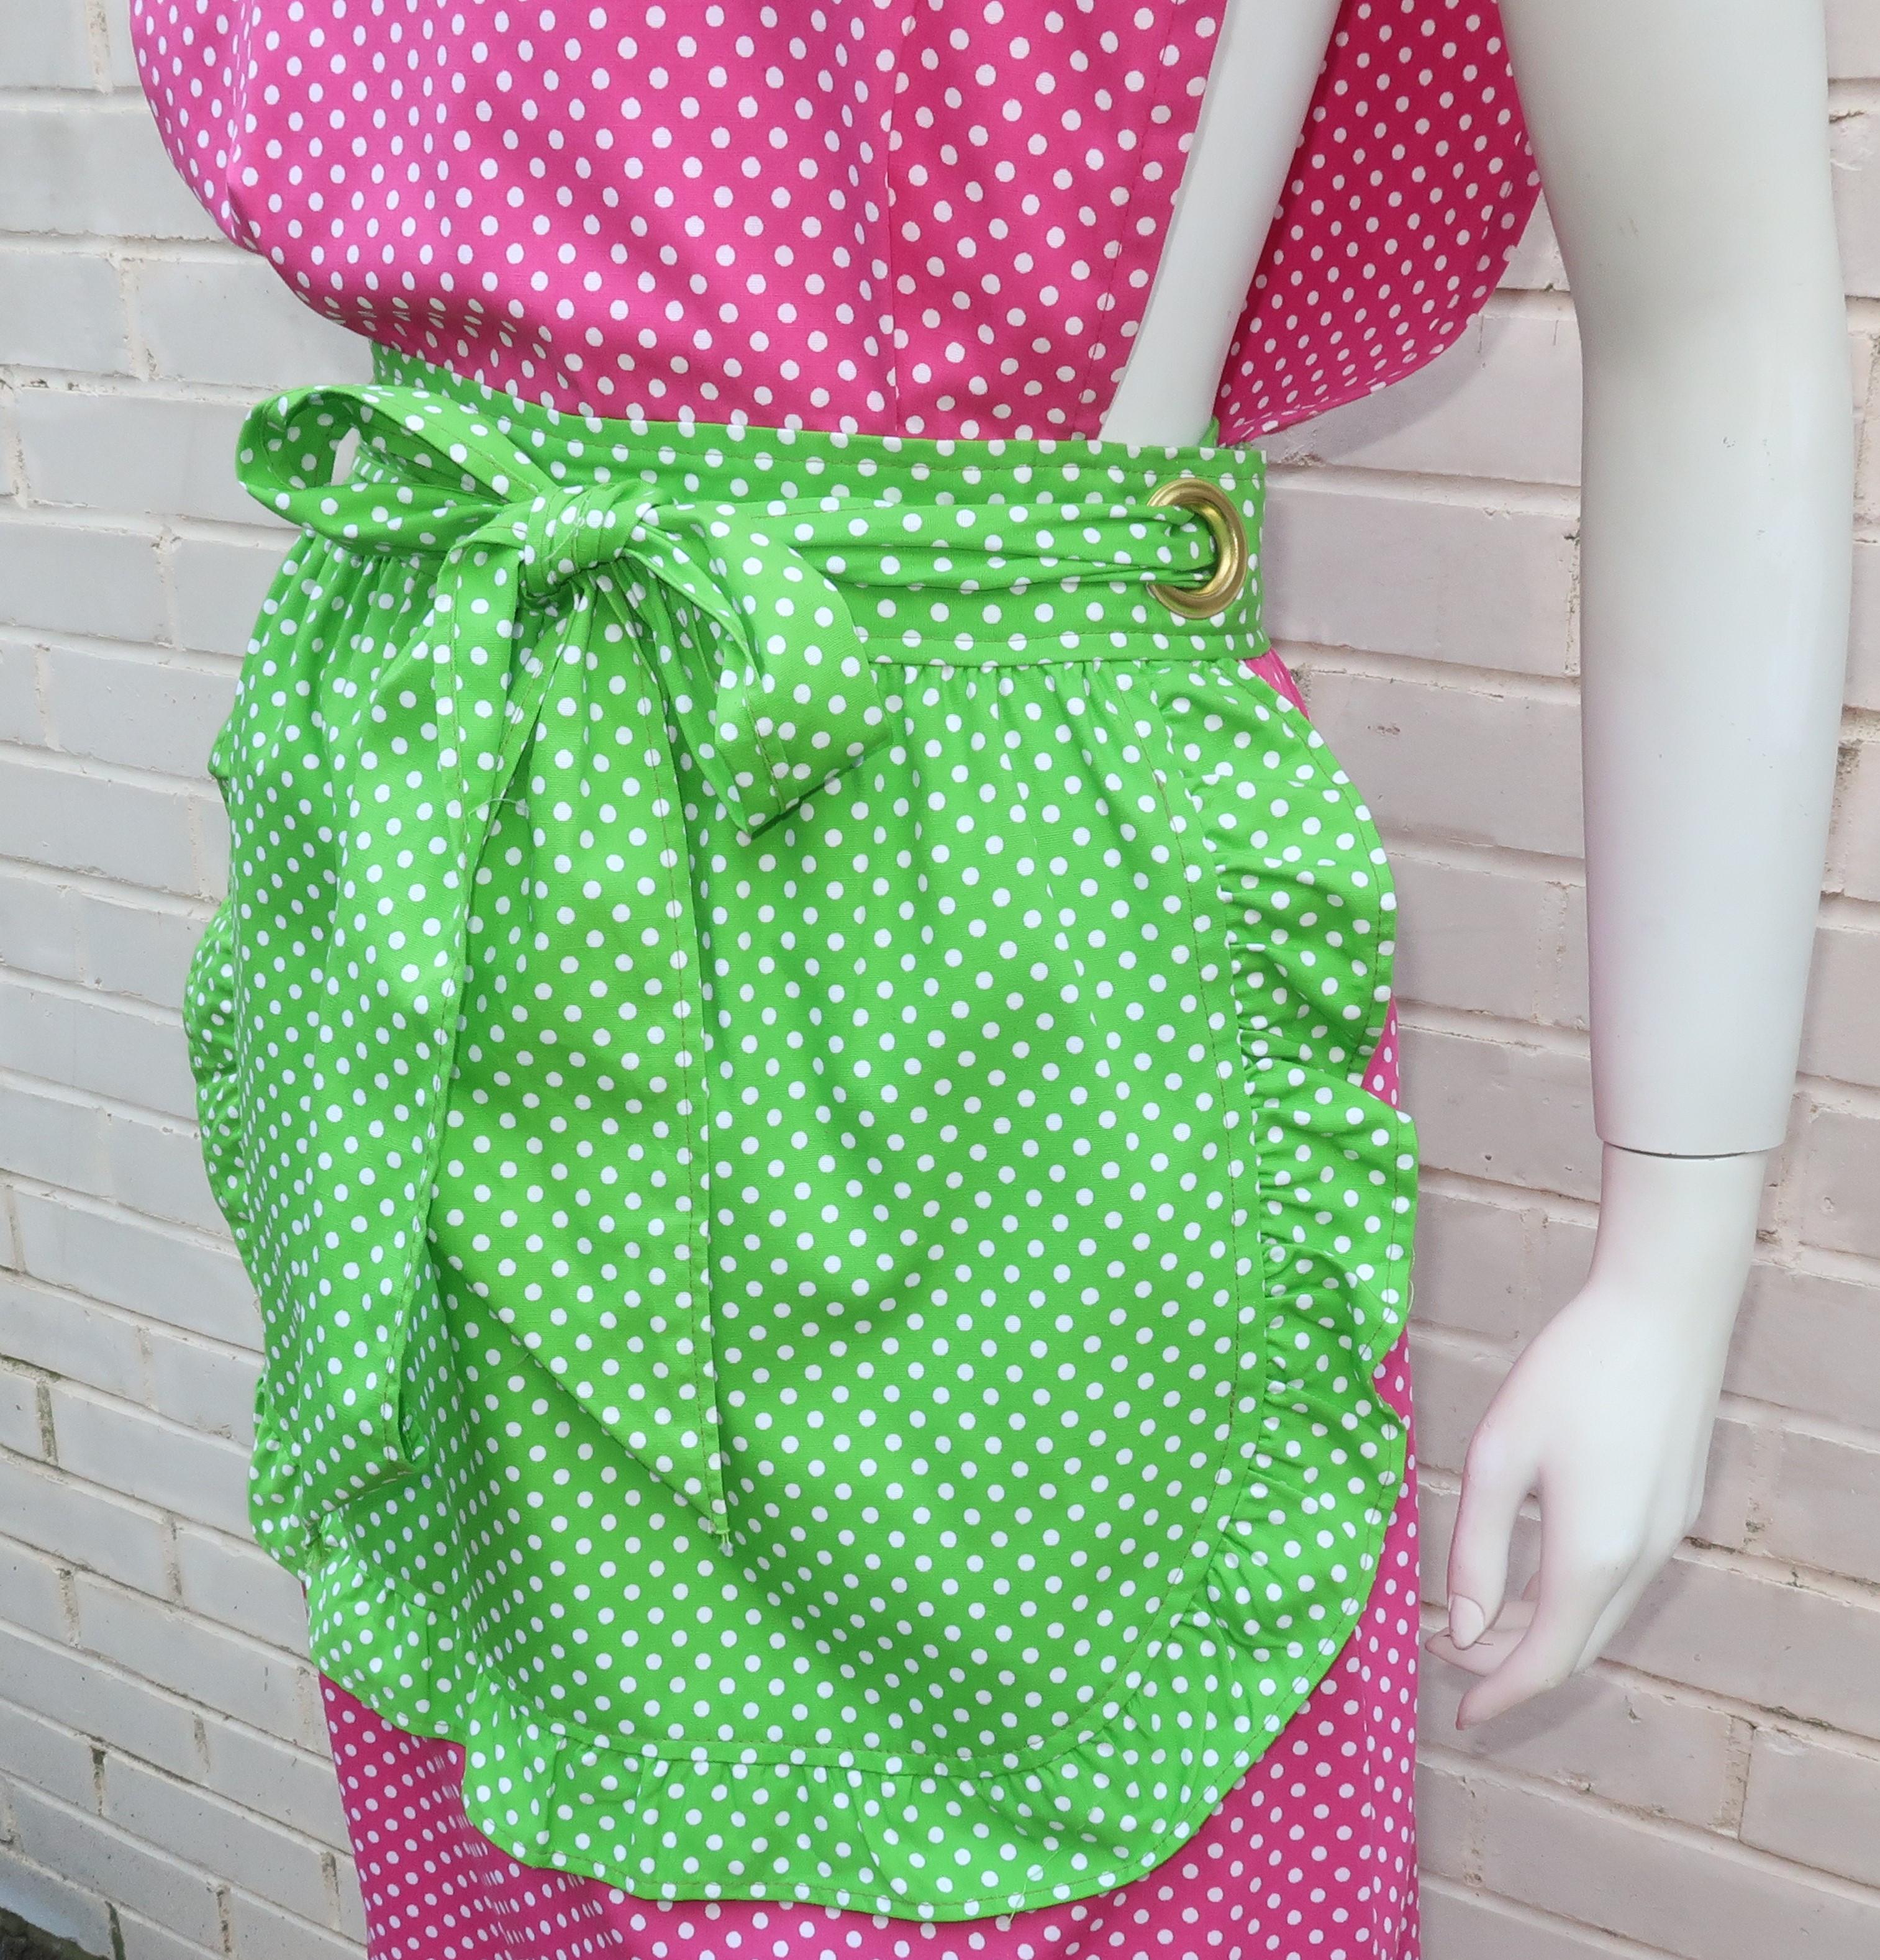 Design House Pink & Green Cotton Pinafore Apron Dress, C.1970 For Sale 2